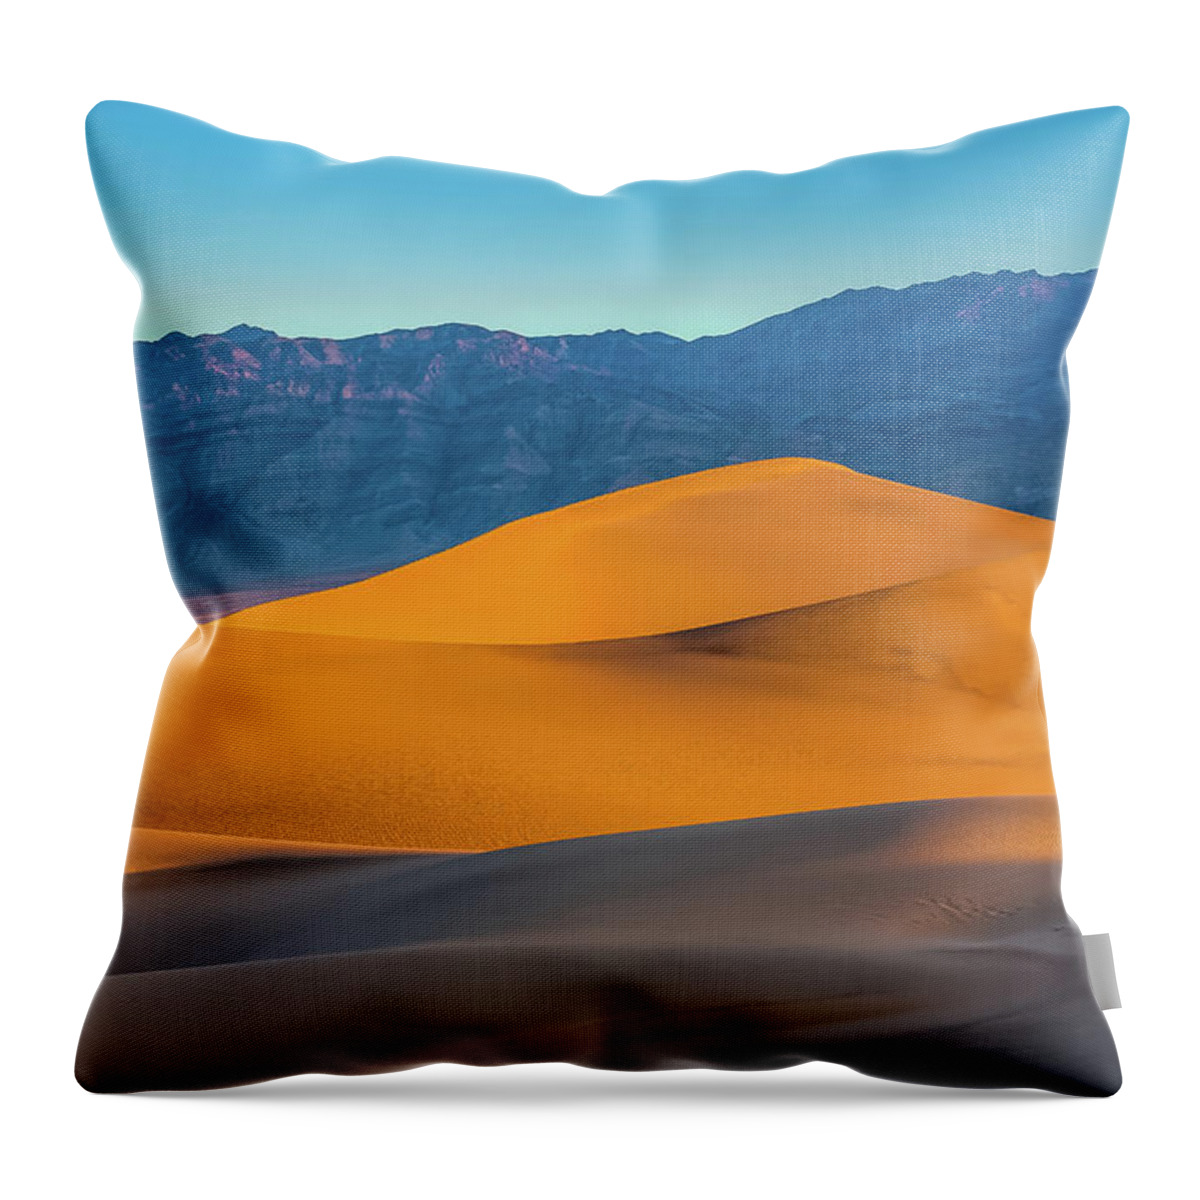 California Throw Pillow featuring the photograph Mesquite Flats Sunsrise by Peter Tellone